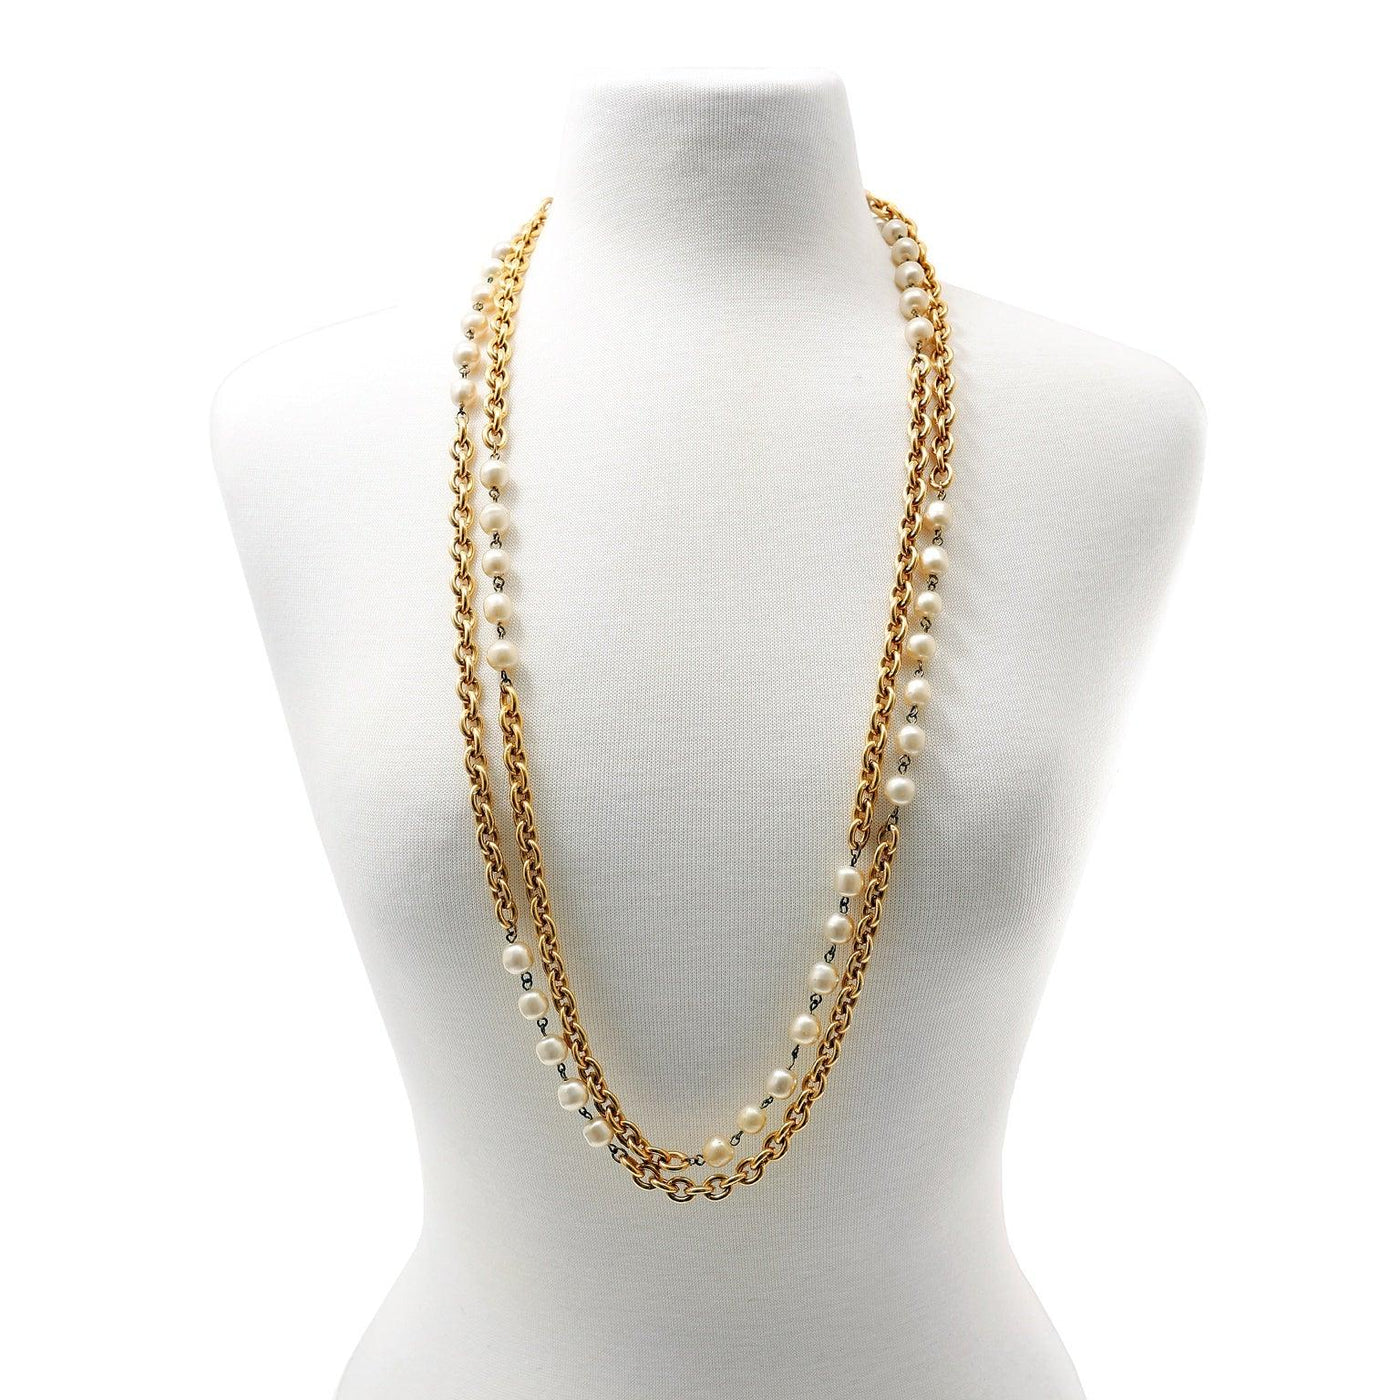 Chanel Double Chain Necklace with Pearl Stations - Only Authentics